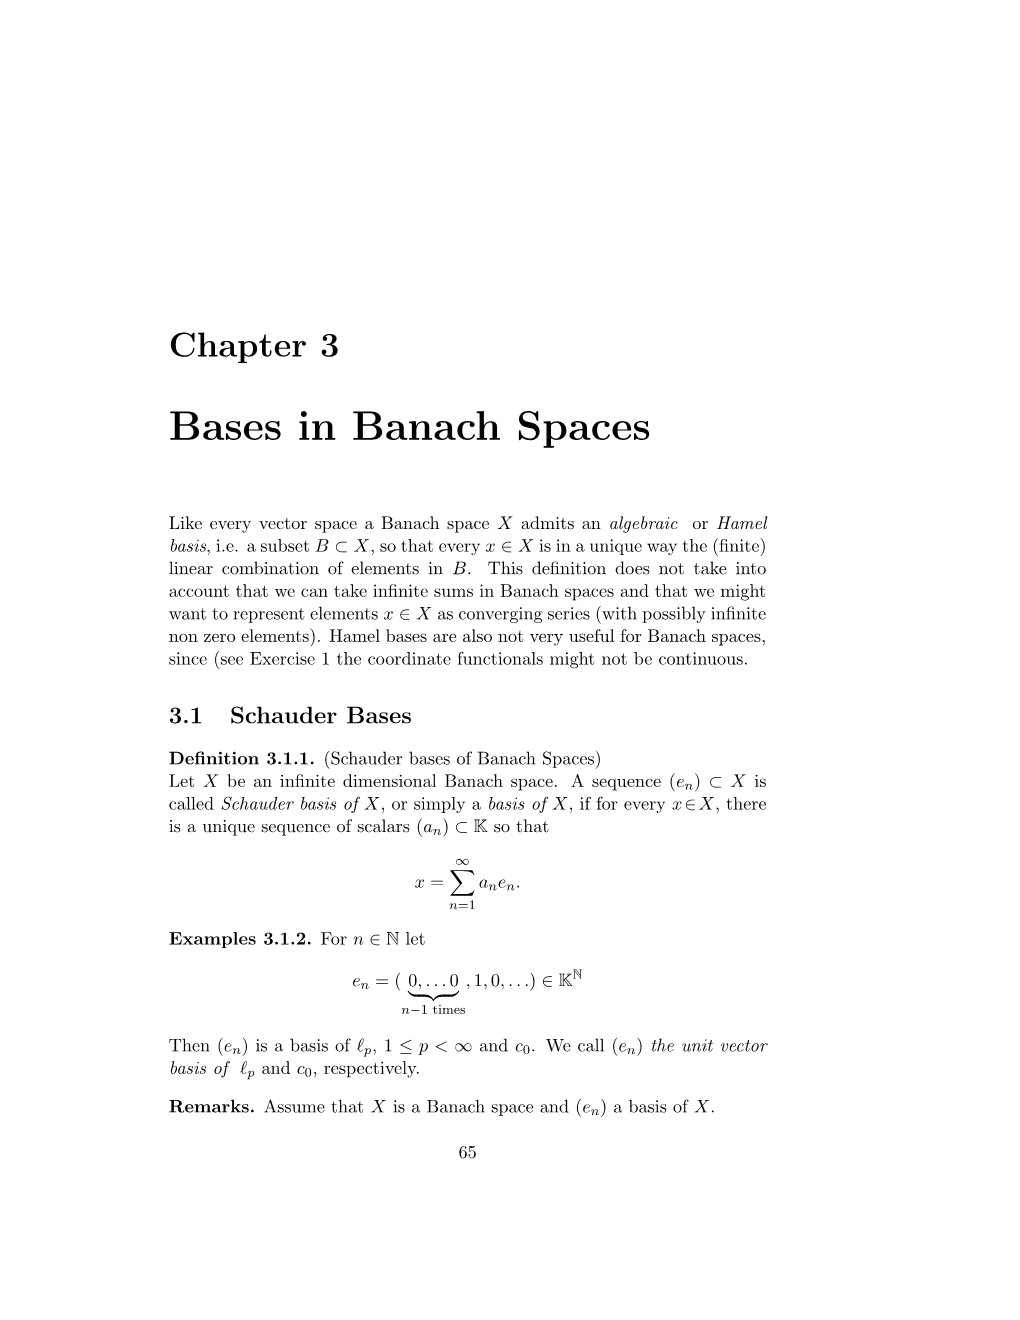 Bases in Banach Spaces